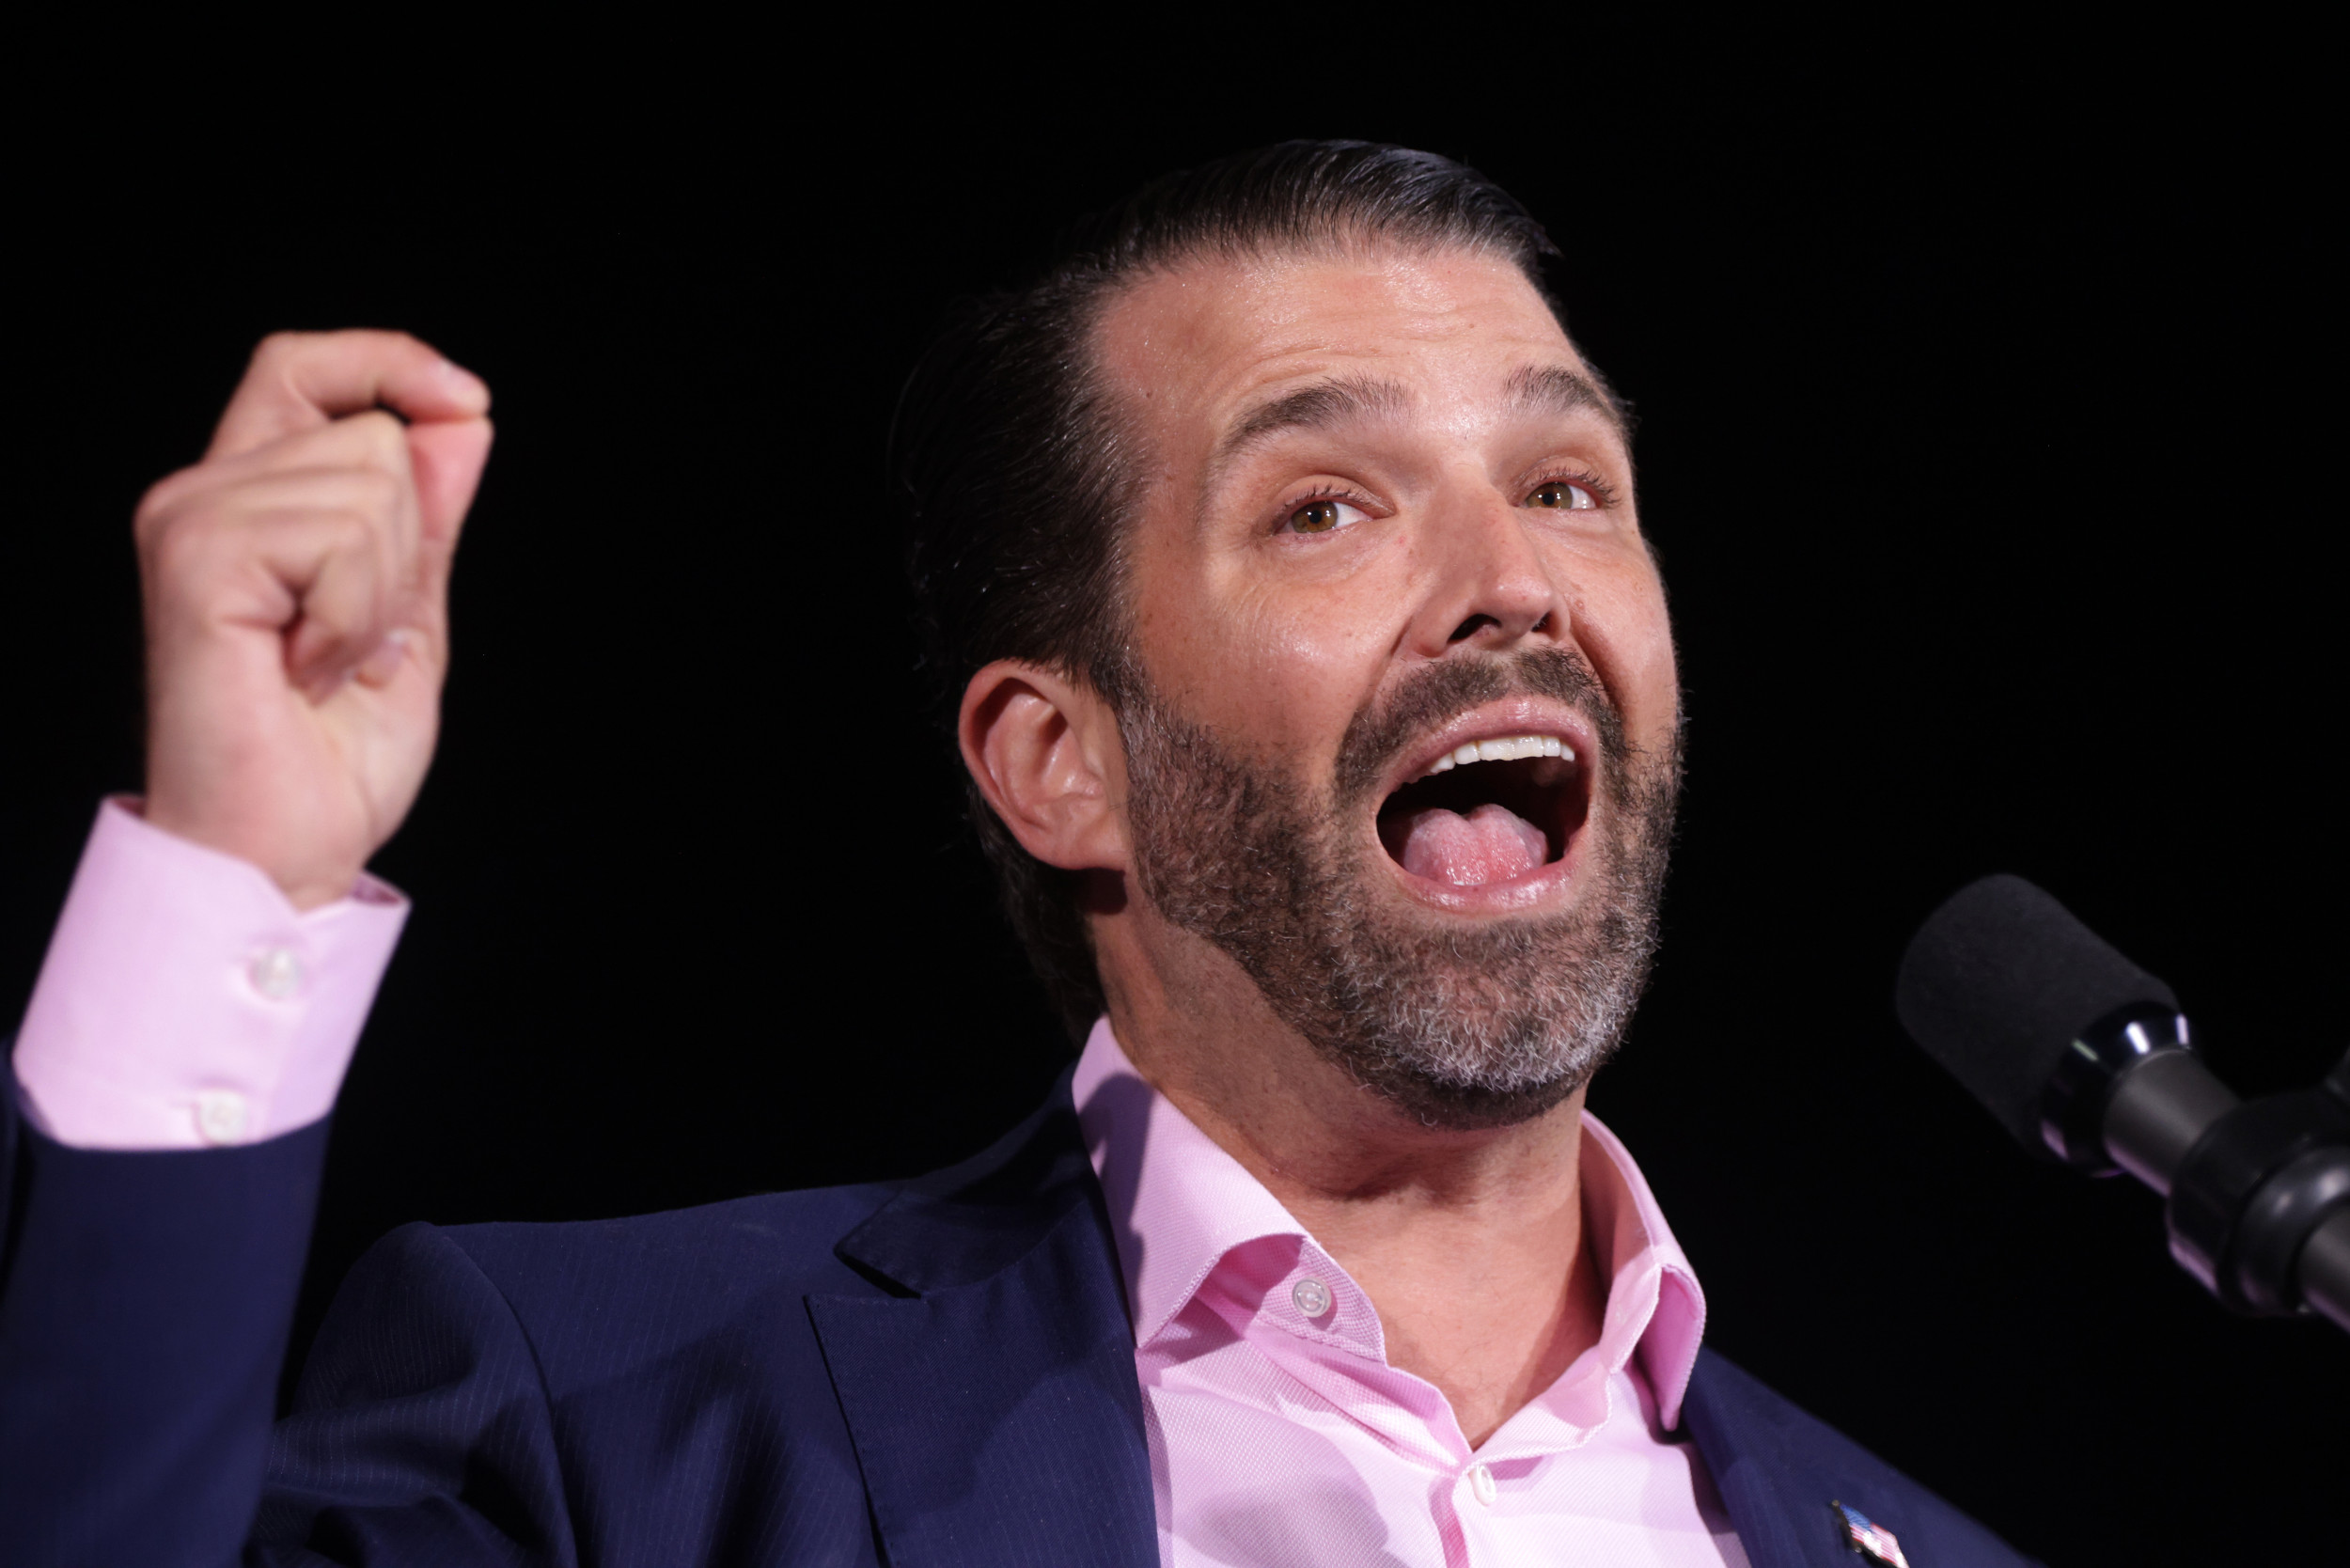 Donald Trump Jr. blows up Twitter because of false allegations that Texas Governor Abbott called Democrat